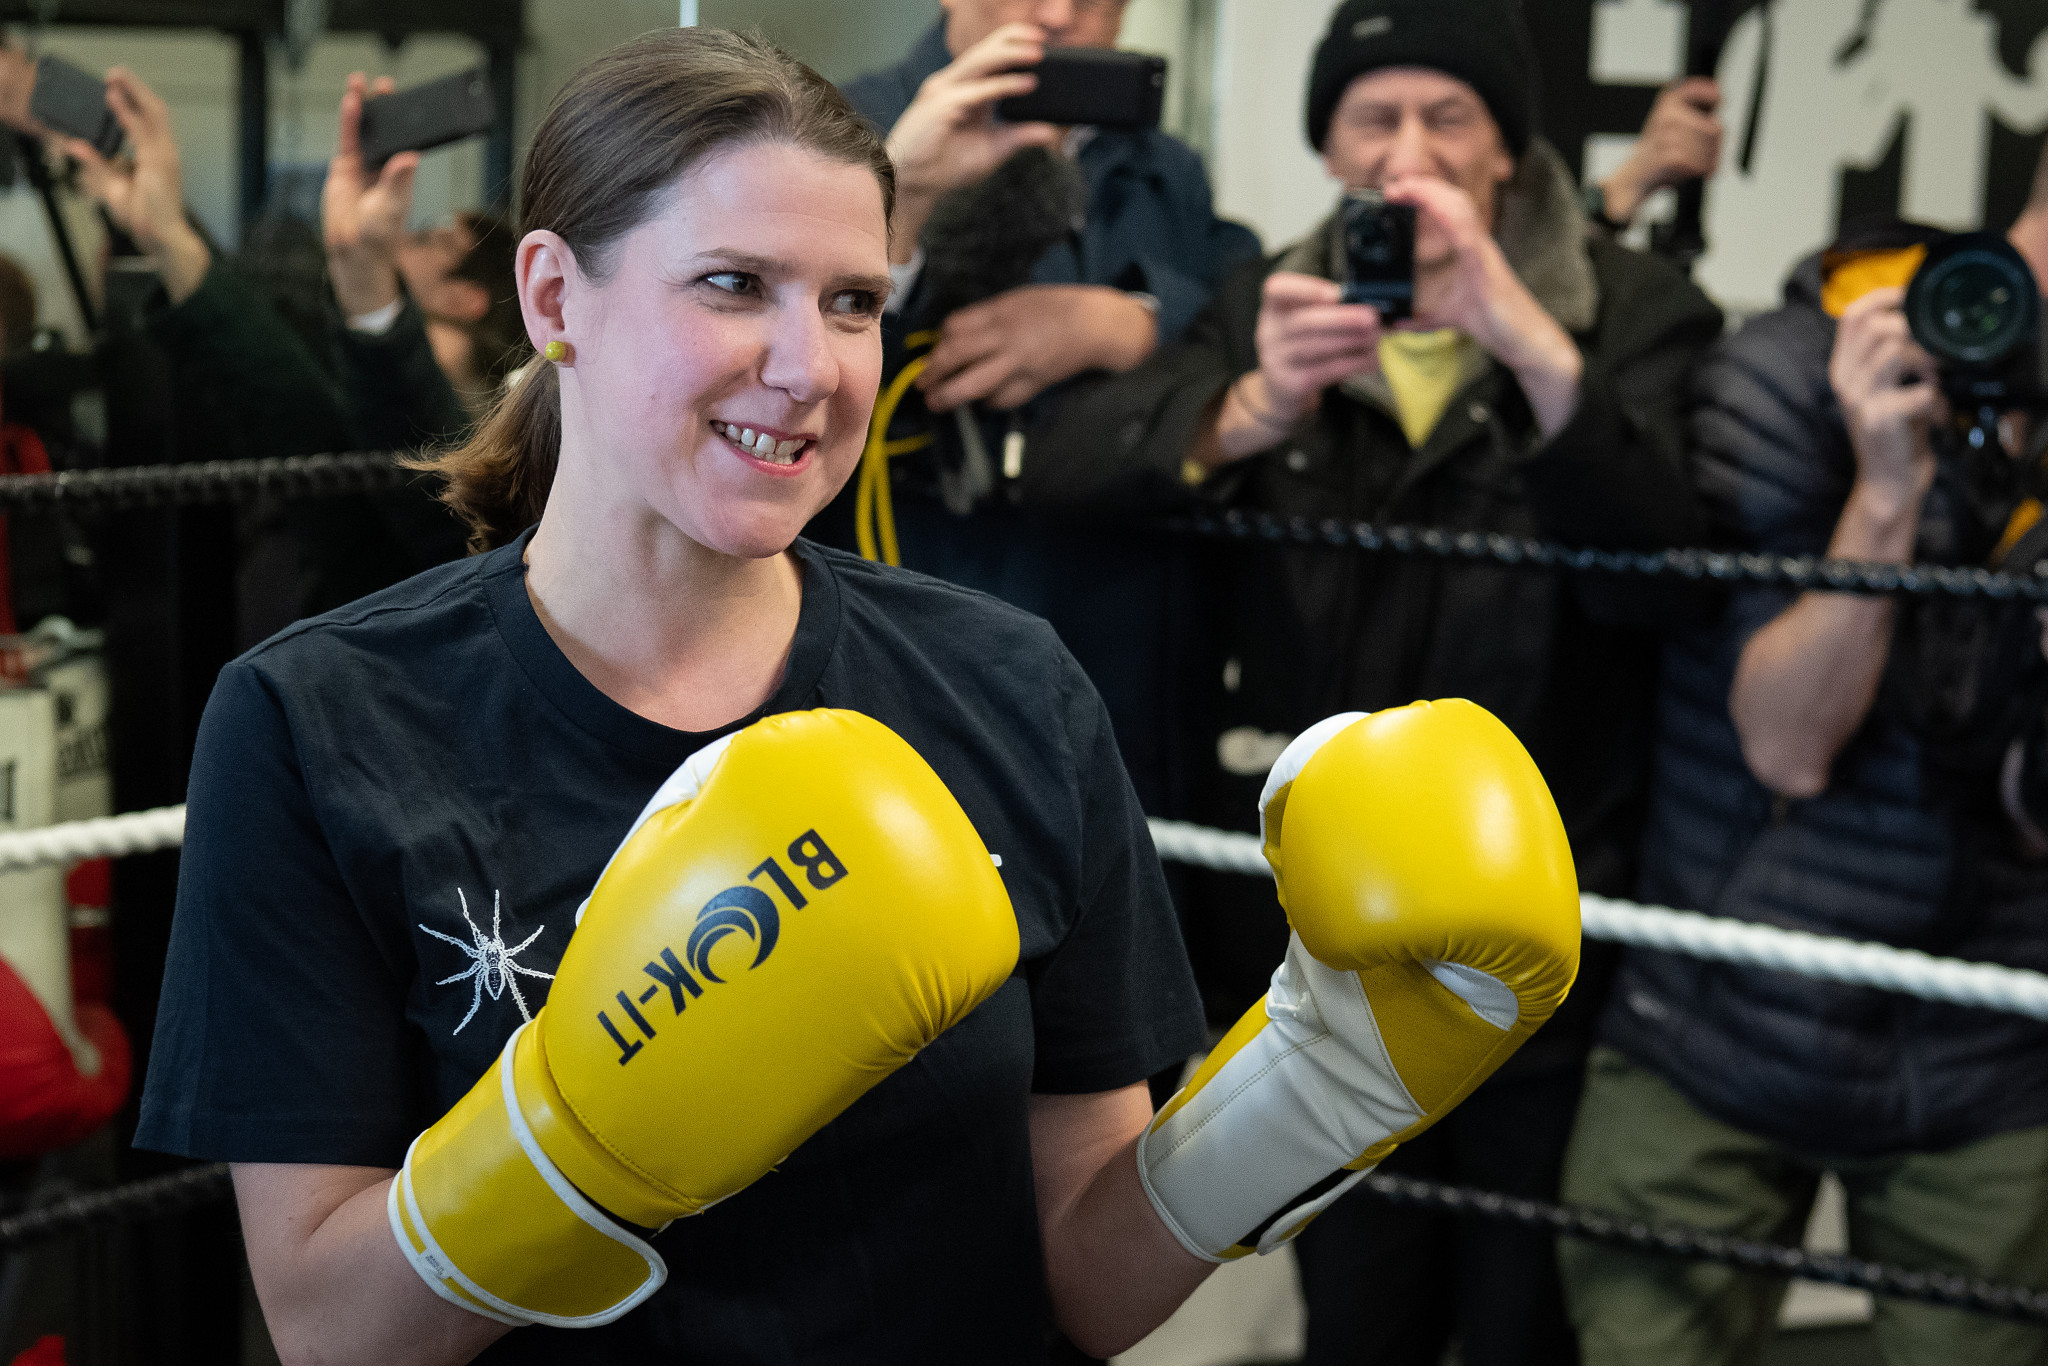 Even Liberal Democrat leader Jo Swinson entered the ring last month, showing how mainstream boxing has become ©Getty Images